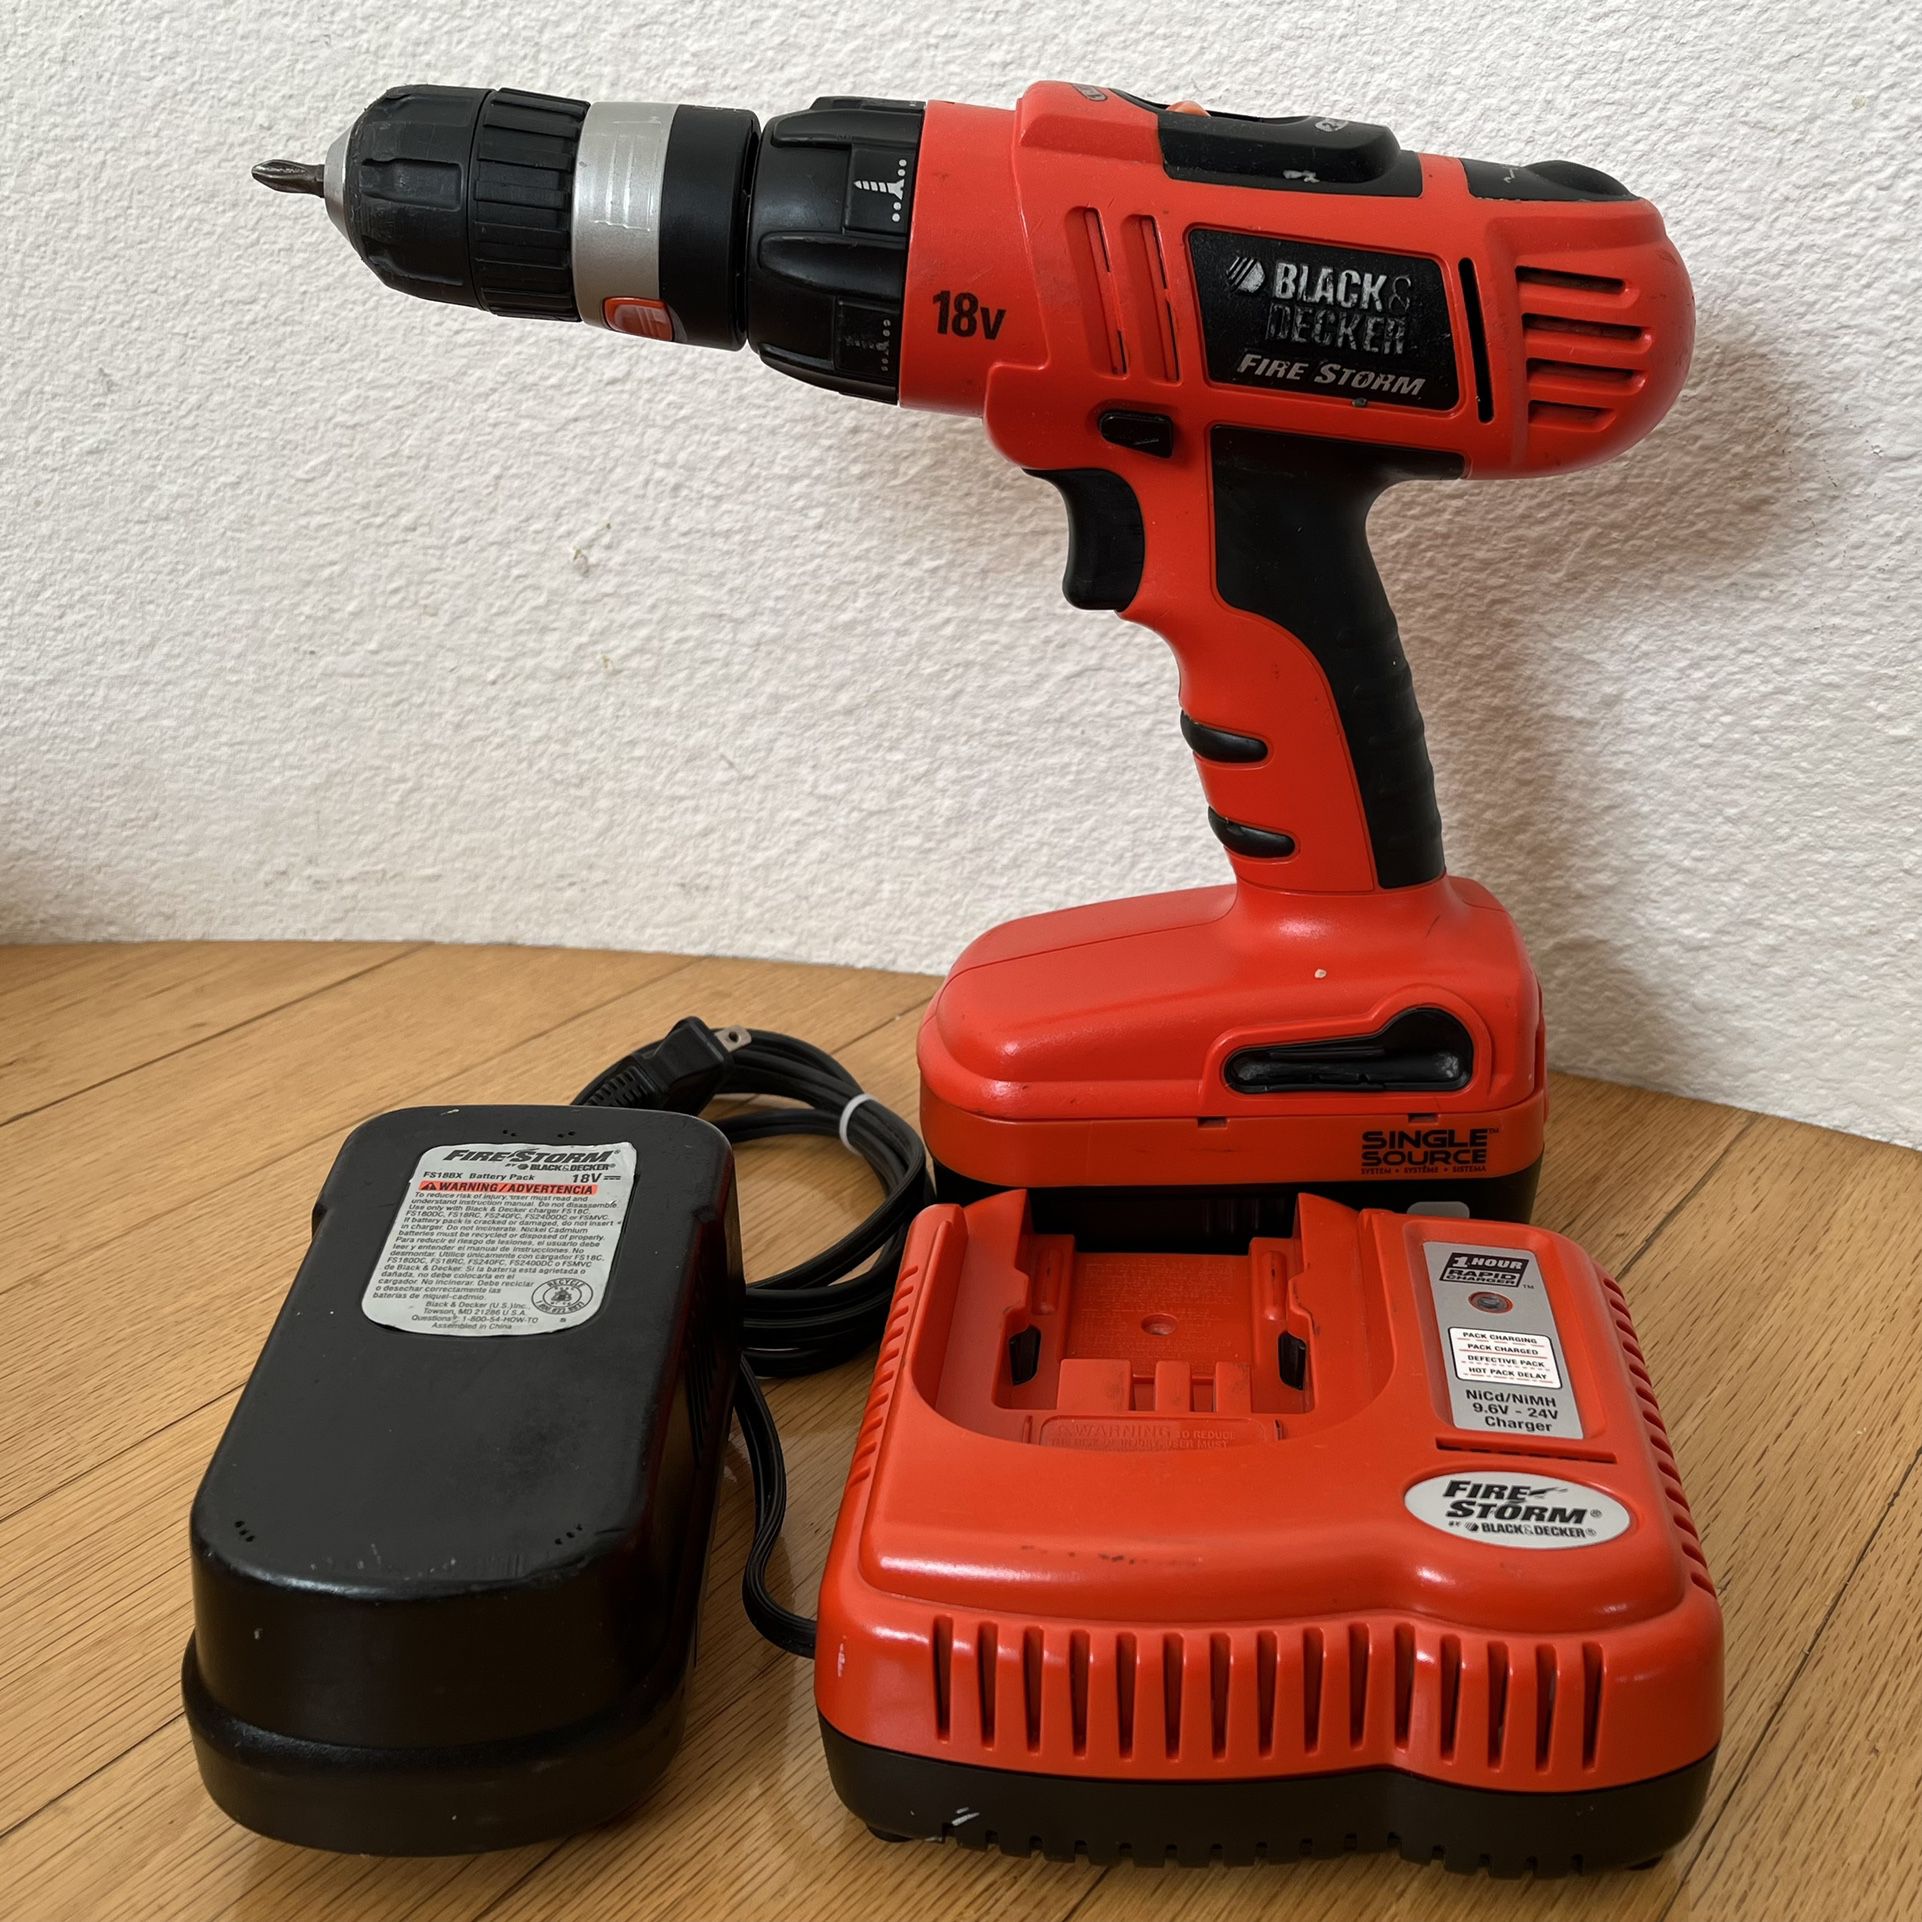 Cordless Black and Decker 18V Fire Storm Drill with battery and charger